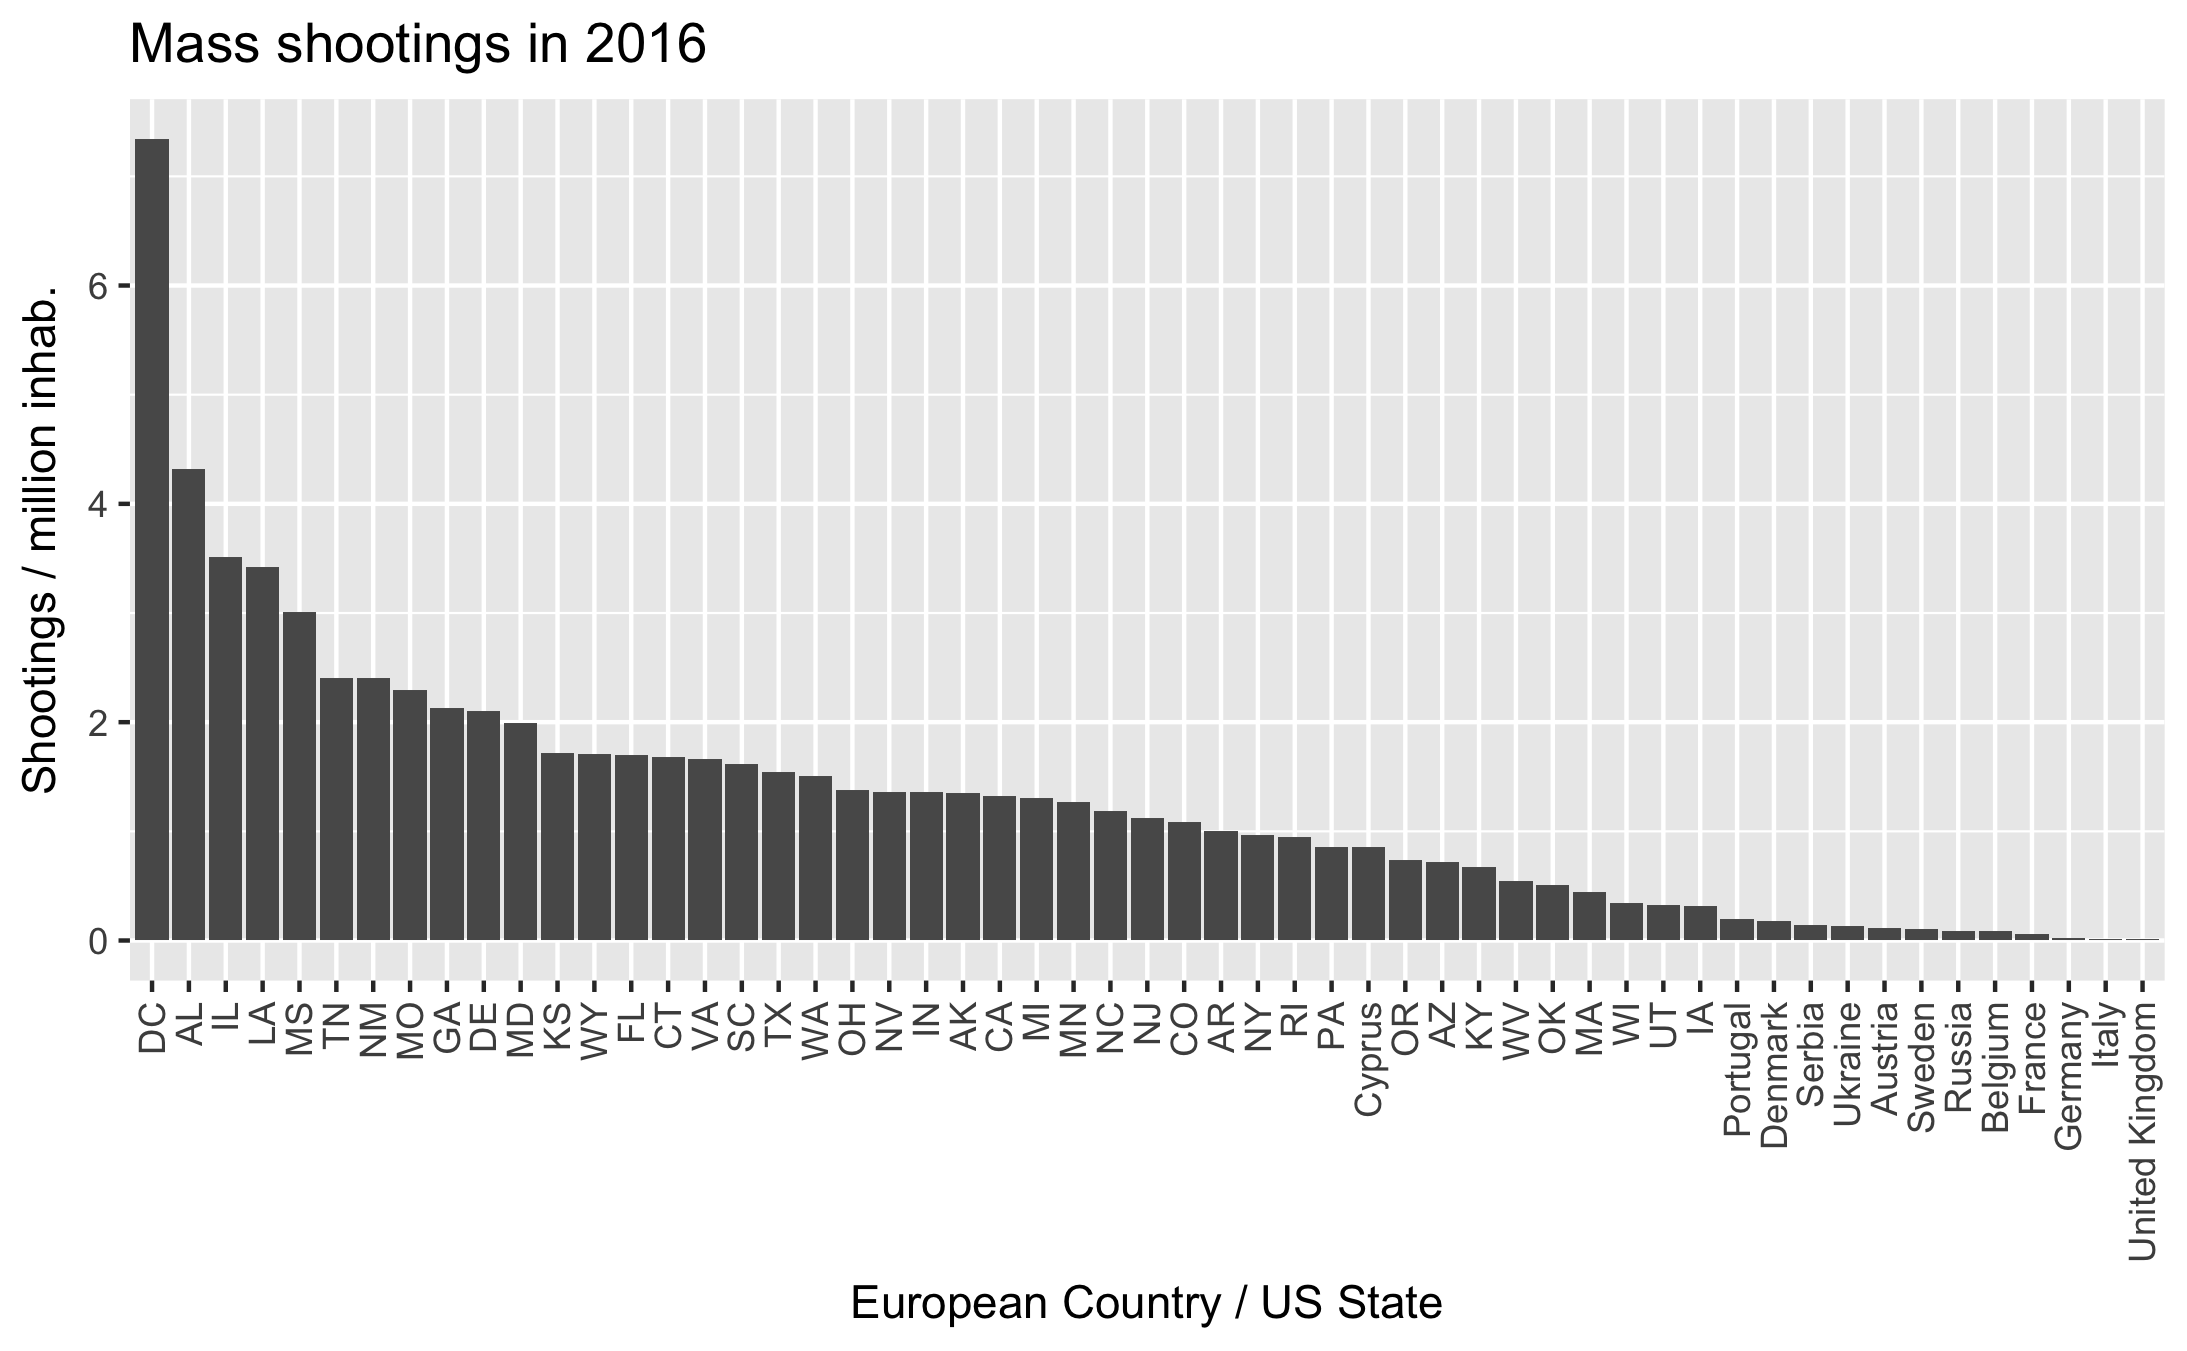 Total number of shootings in 2016, comparing USA to Europe